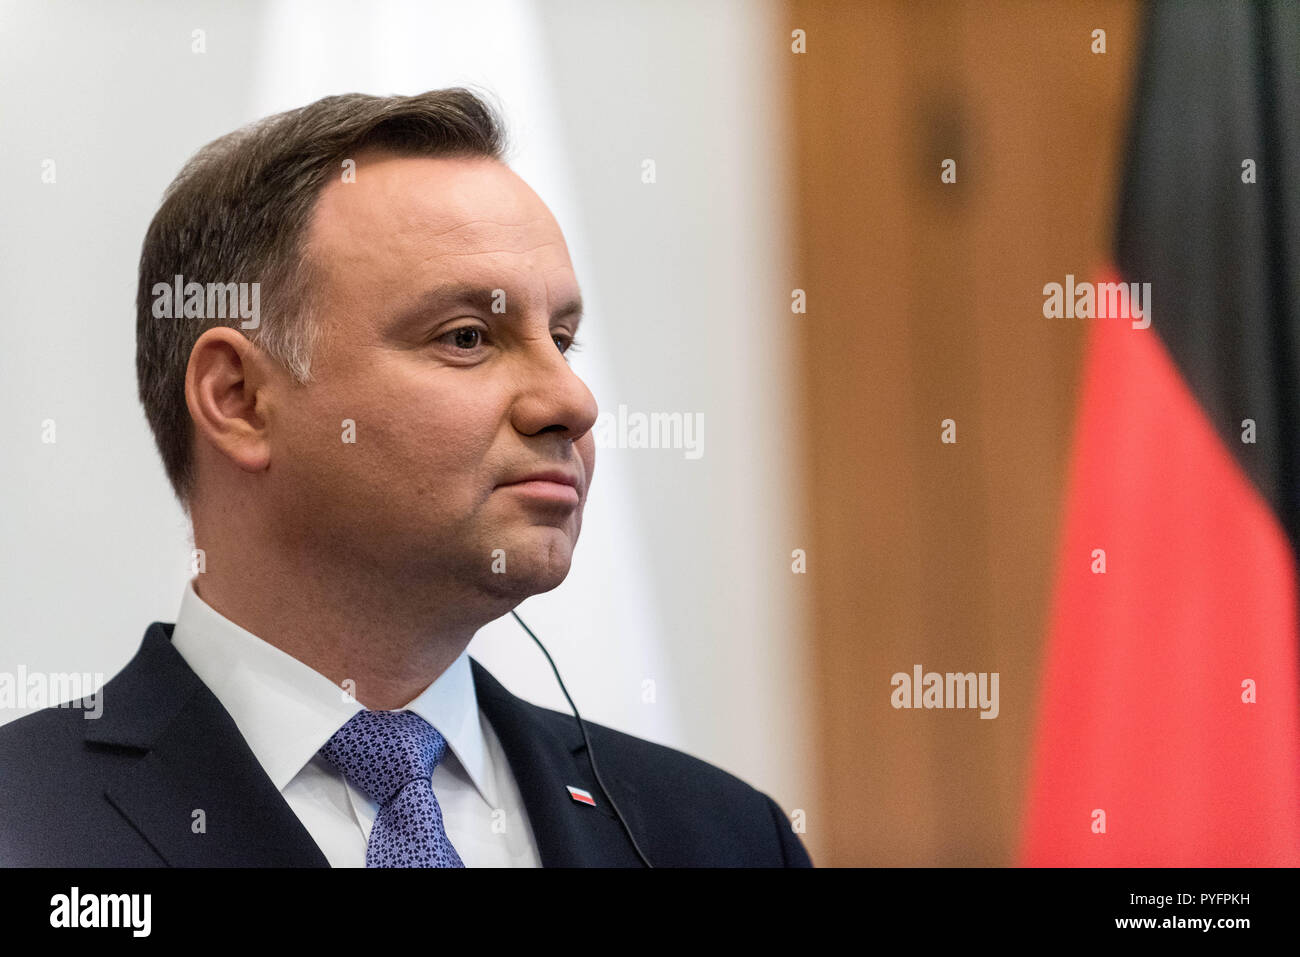 The President of Poland Andrzej Duda seen speaking at a joint press conference with the Federal President Frank-Walter Steinmeier (not pictured) during the reception at Bellevue Palace. Polish president Andrzej Duda paid an official visit to German to meet with the German president to discuss the economic development between the two countries. Stock Photo